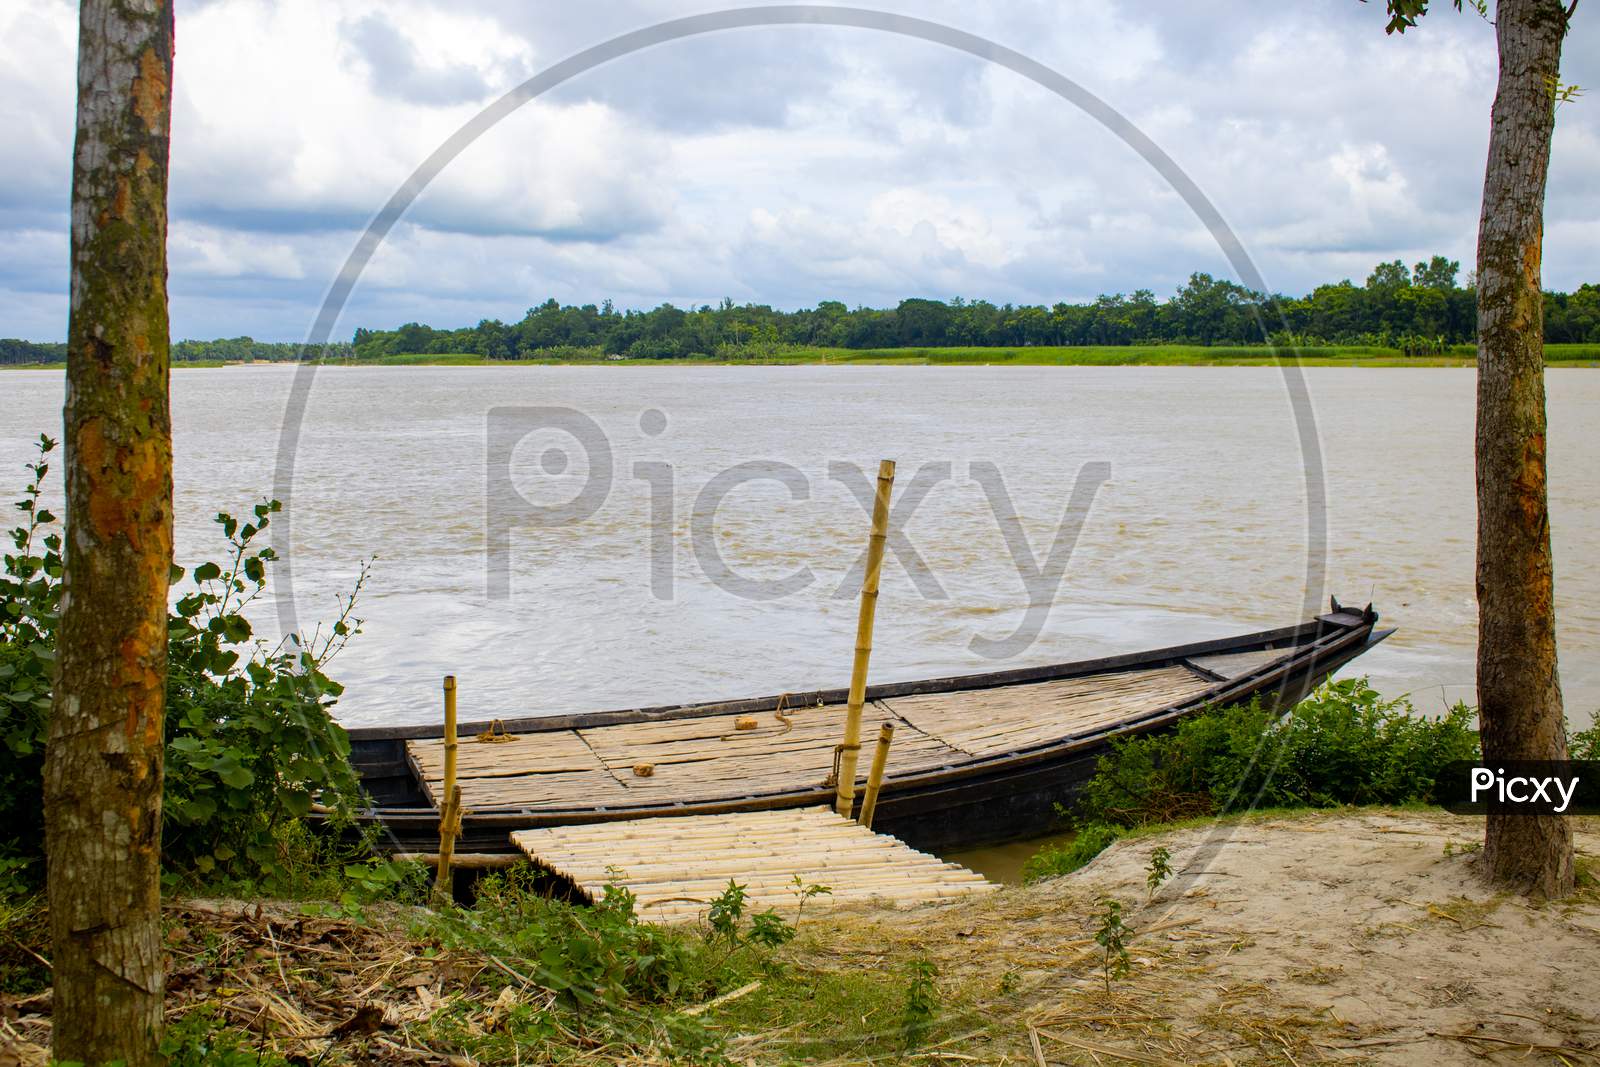 A Large Wooden Boat Tied To The River Bank. This Is A Big River Crossing Boat. A Beautiful River Of Bangladesh.